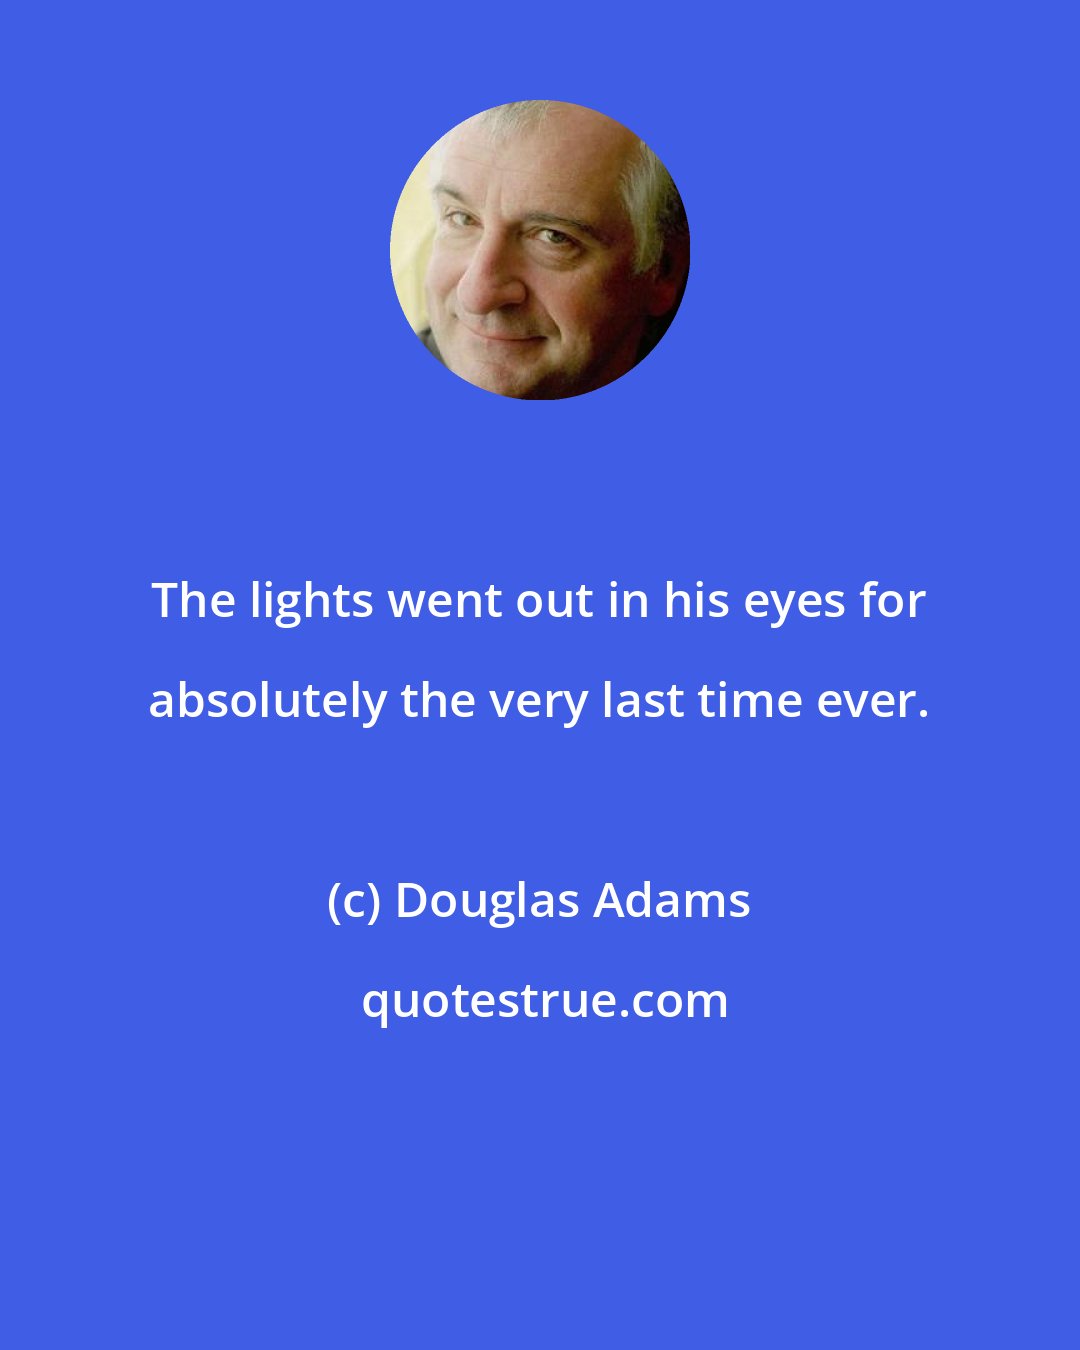 Douglas Adams: The lights went out in his eyes for absolutely the very last time ever.